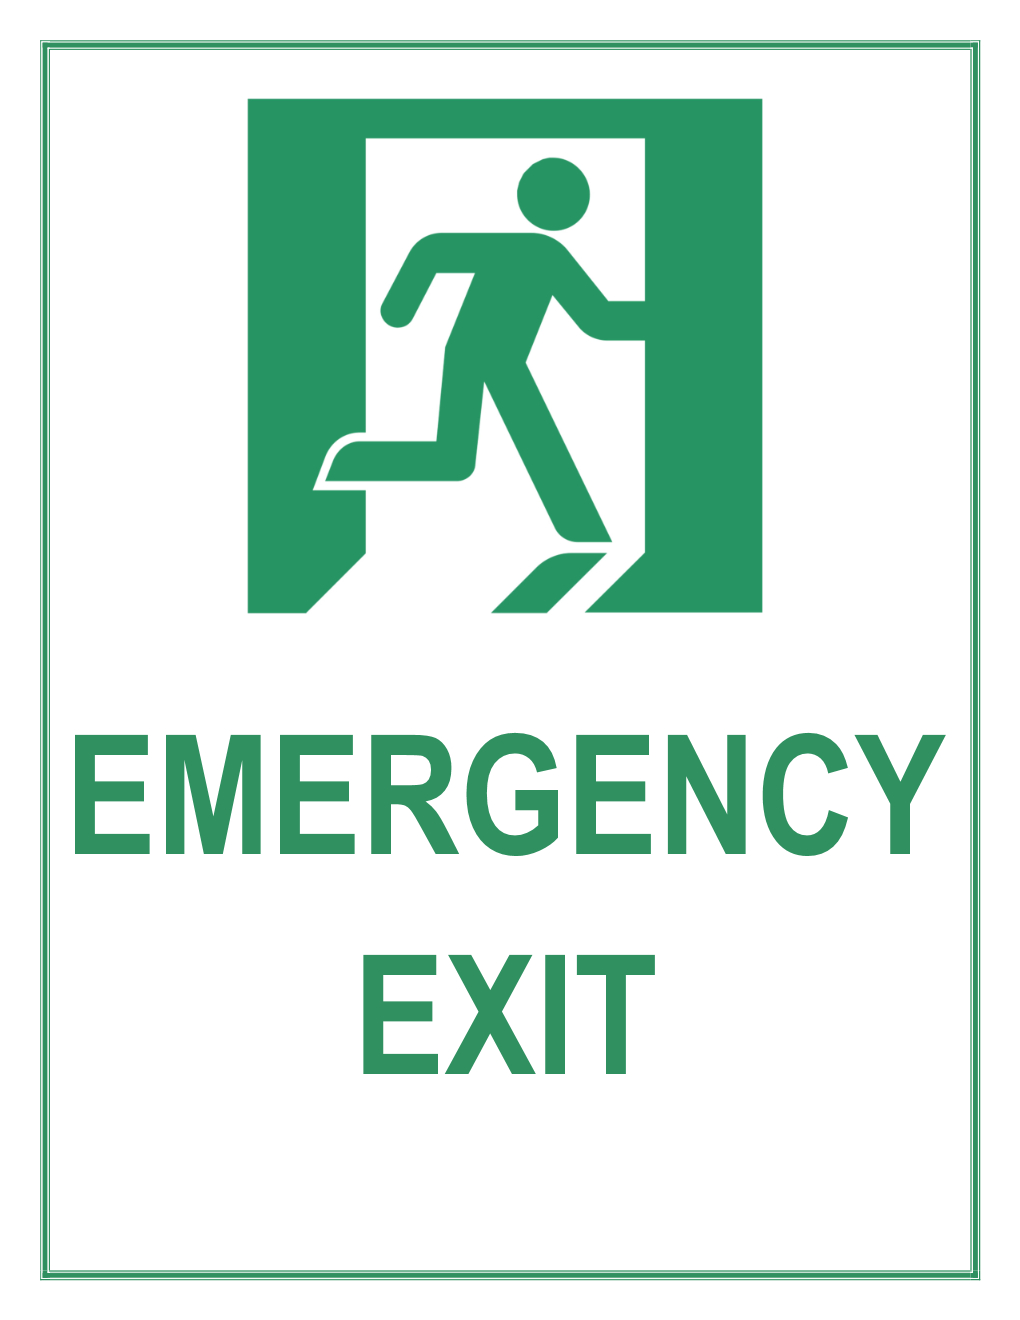 Emergency Exit Only Sign Free Printable Printable Templates